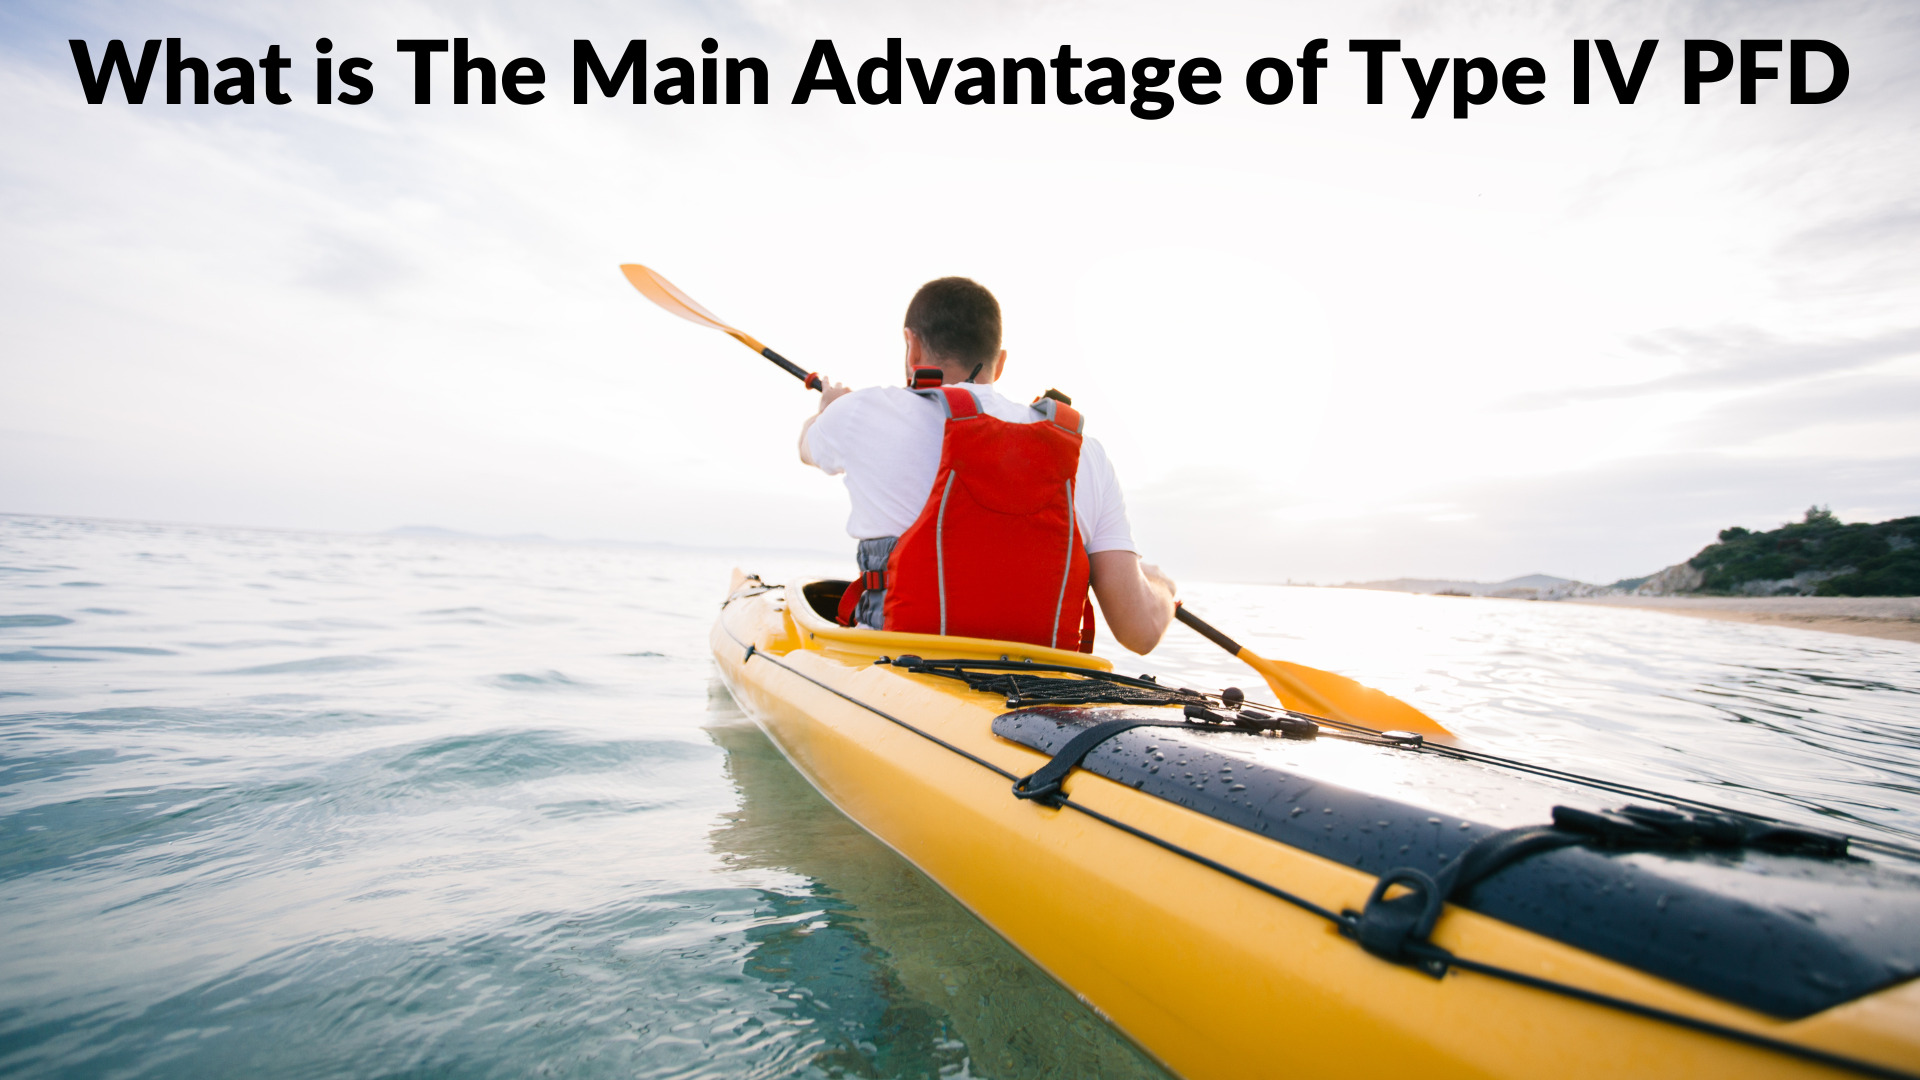 What Is The Main Advantage Of A Type IV PFD?